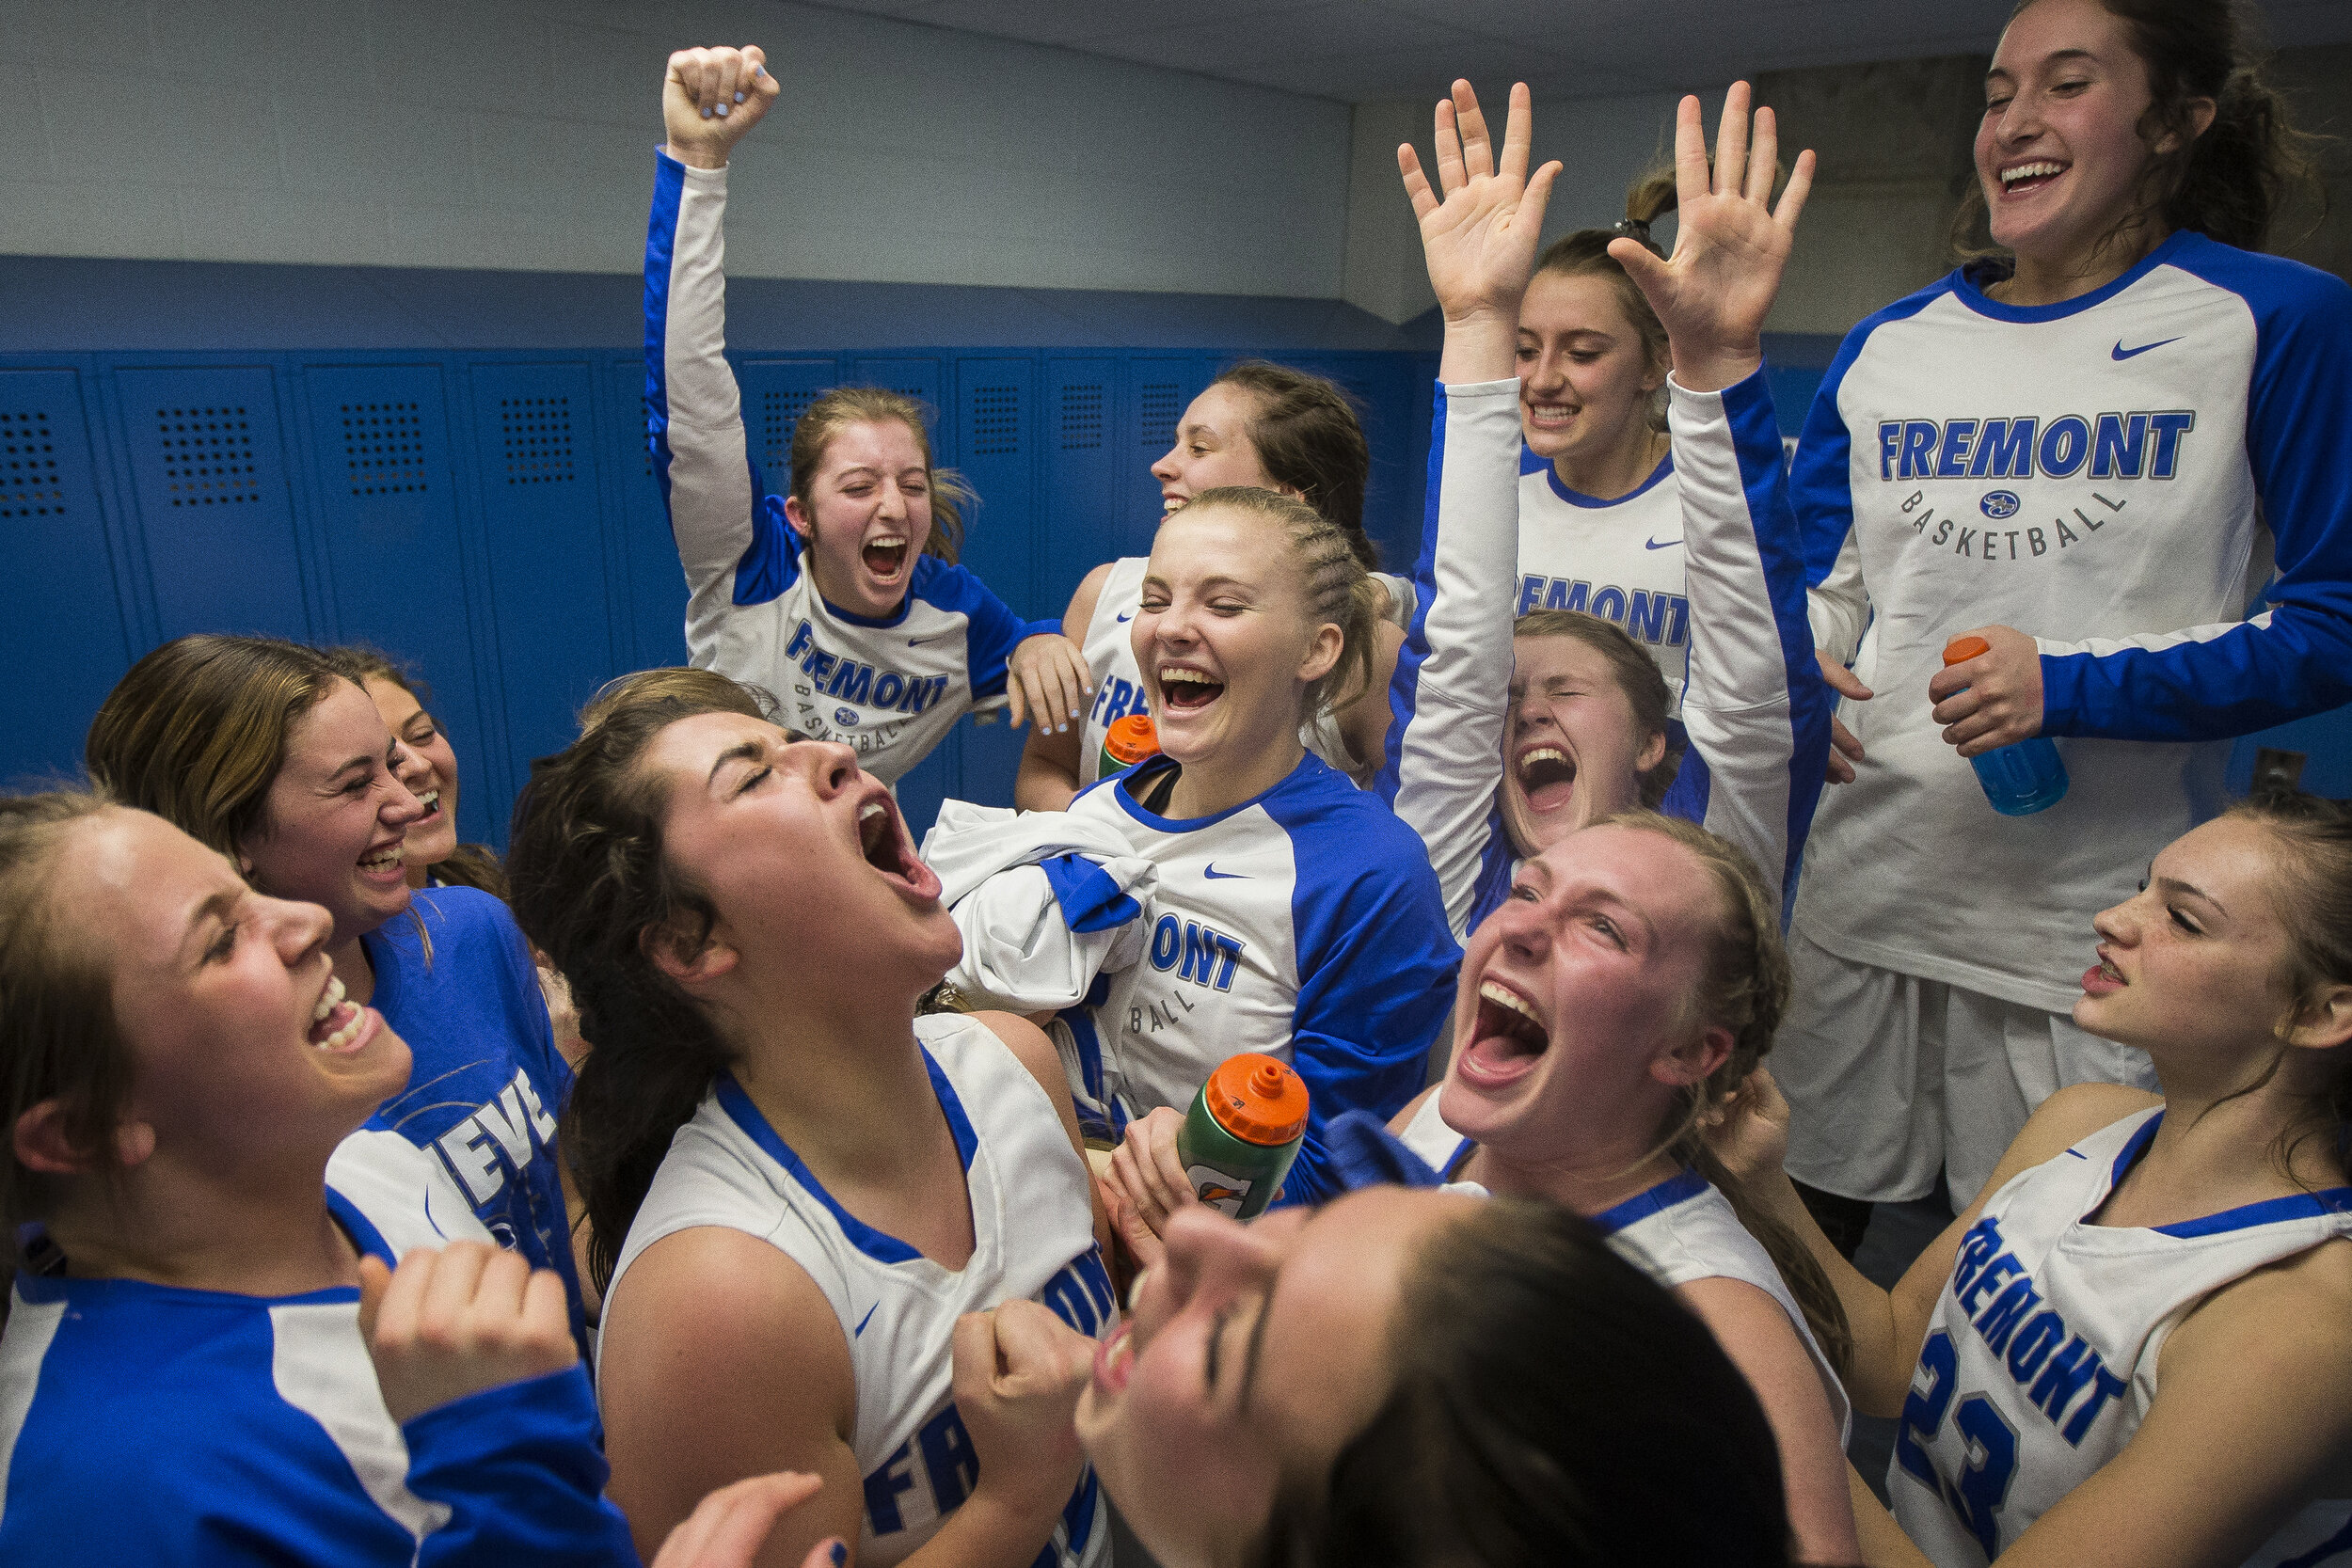  After a layup in the final seconds of the game from Karlie Valdez, the Fremont Silverwolves celebrate in the locker room after defeating Riverton 48-46 in the Class 6A state quarterfinals Feb. 22 at Salt Lake Community College in Taylorsville, Utah.